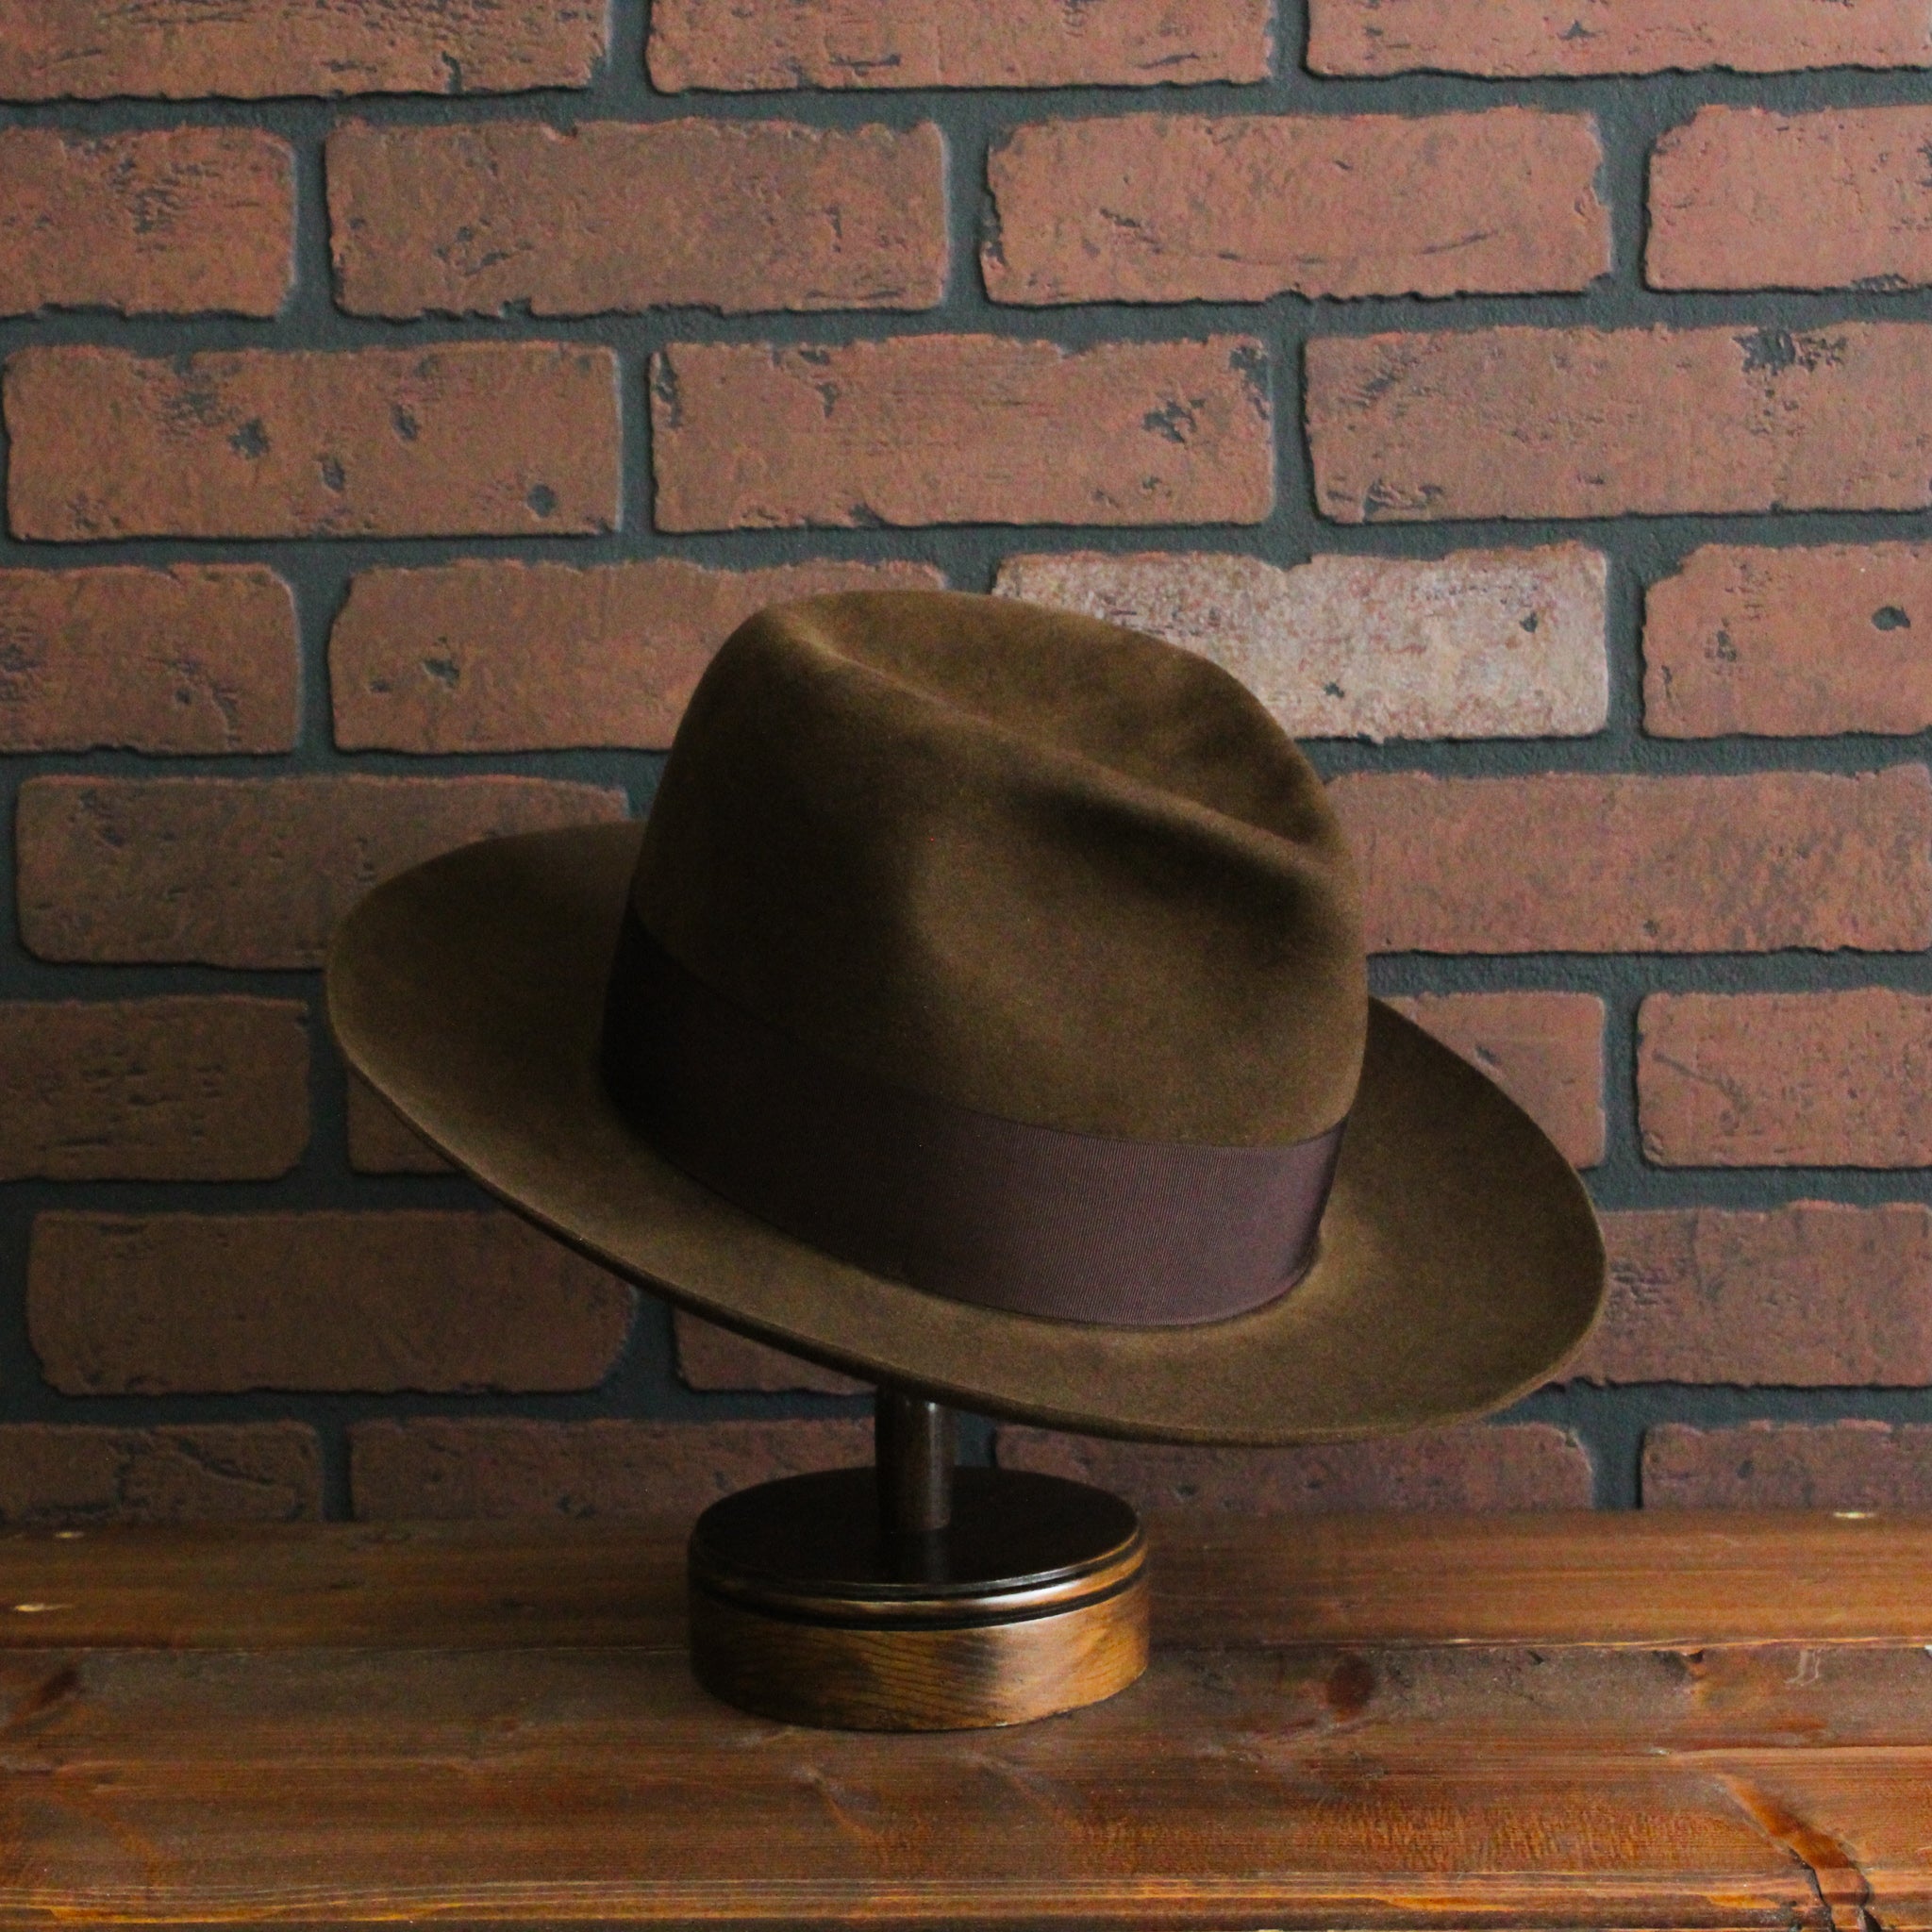 Inspired by the hat worn by JOHNNY DEPP as John Dillinger in "Public Enemies"